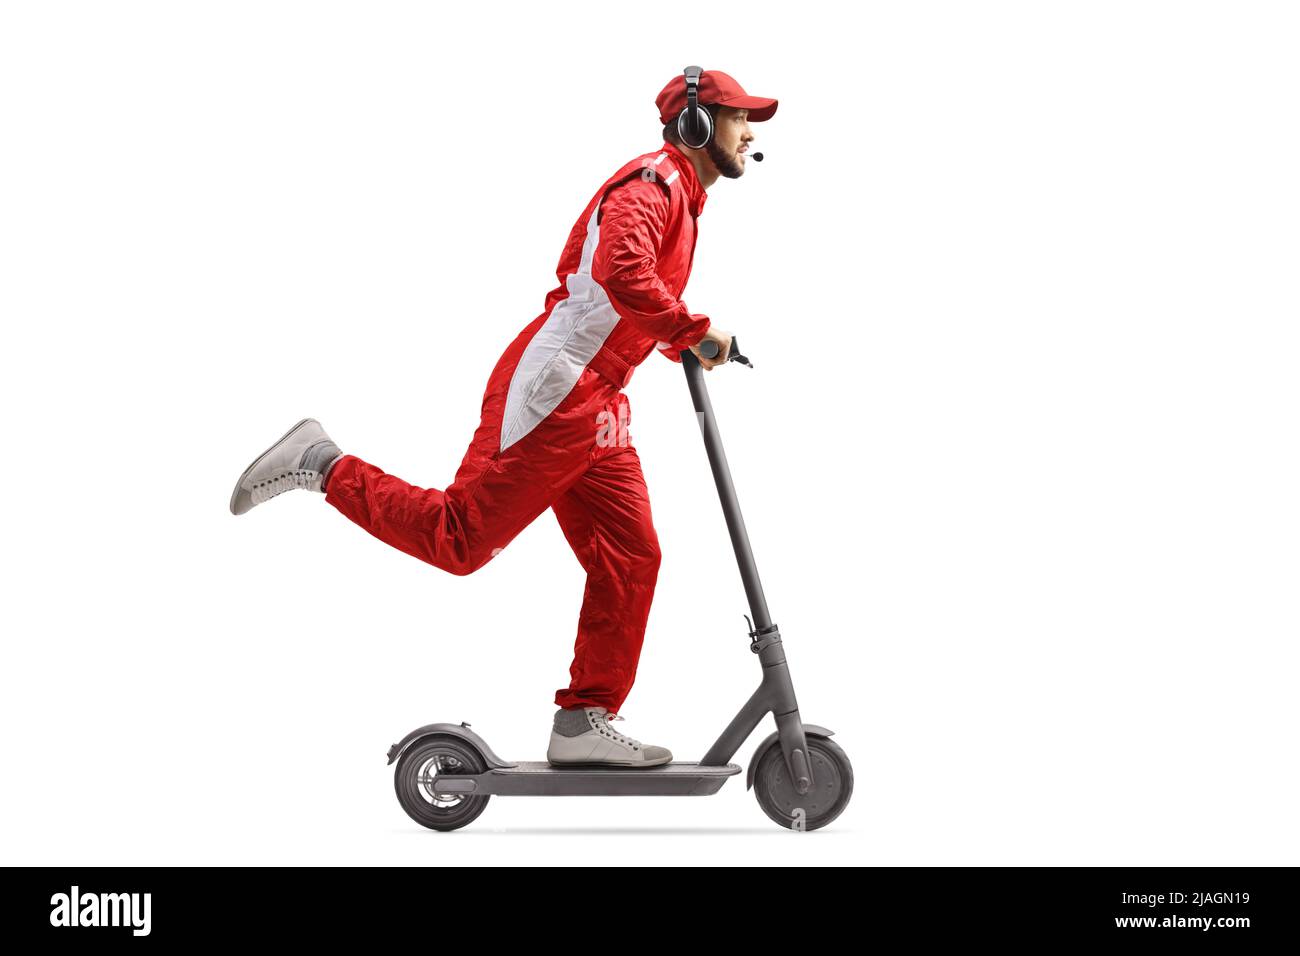 Full length profile shot of a racer in a red suit riding an electric scooter isolated on white background Stock Photo